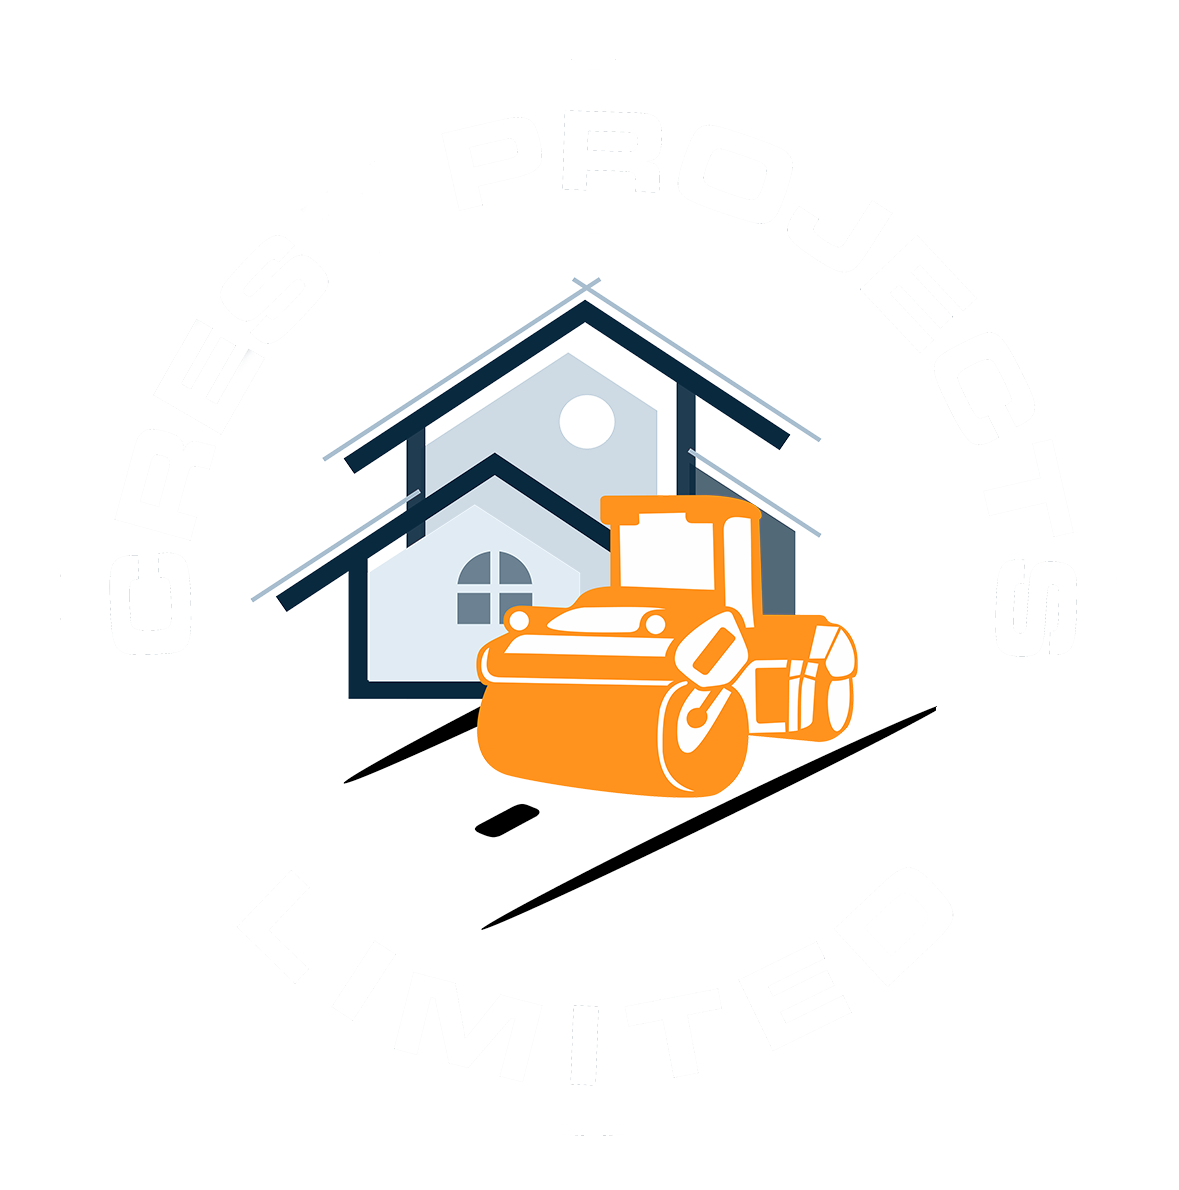 Crest Project Limited